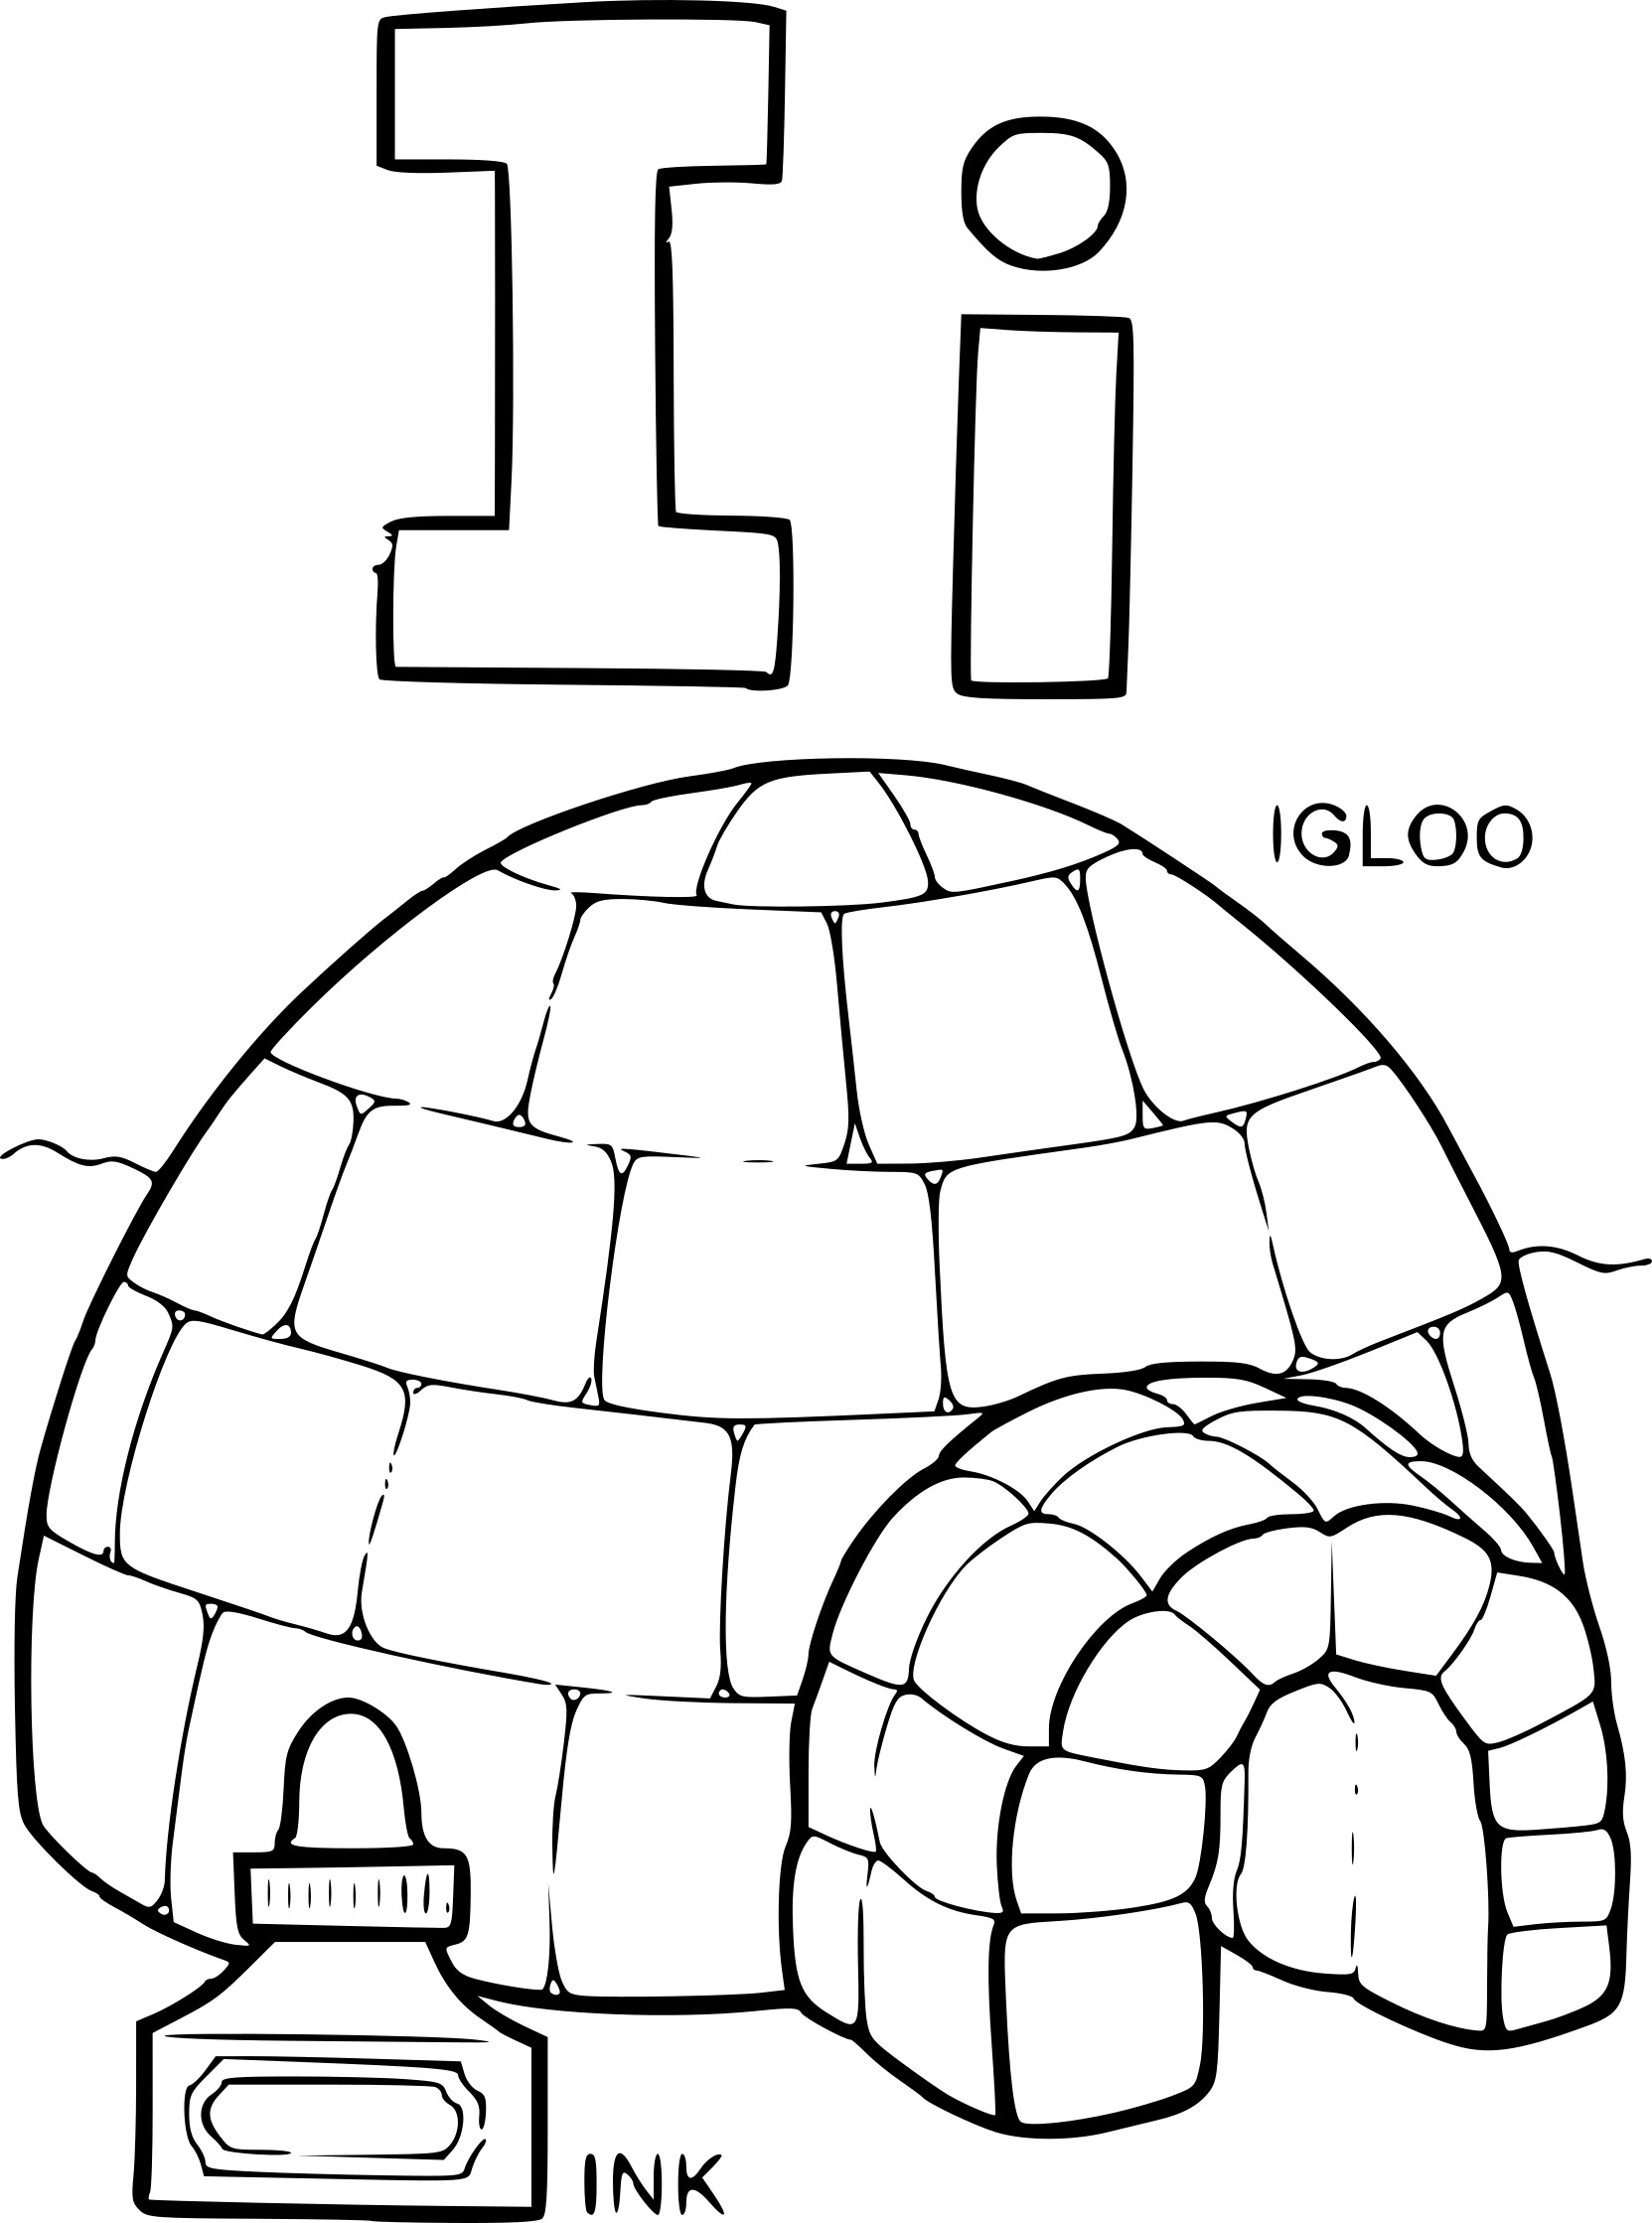 Top 120+ igloo drawing for kids - seven.edu.vn